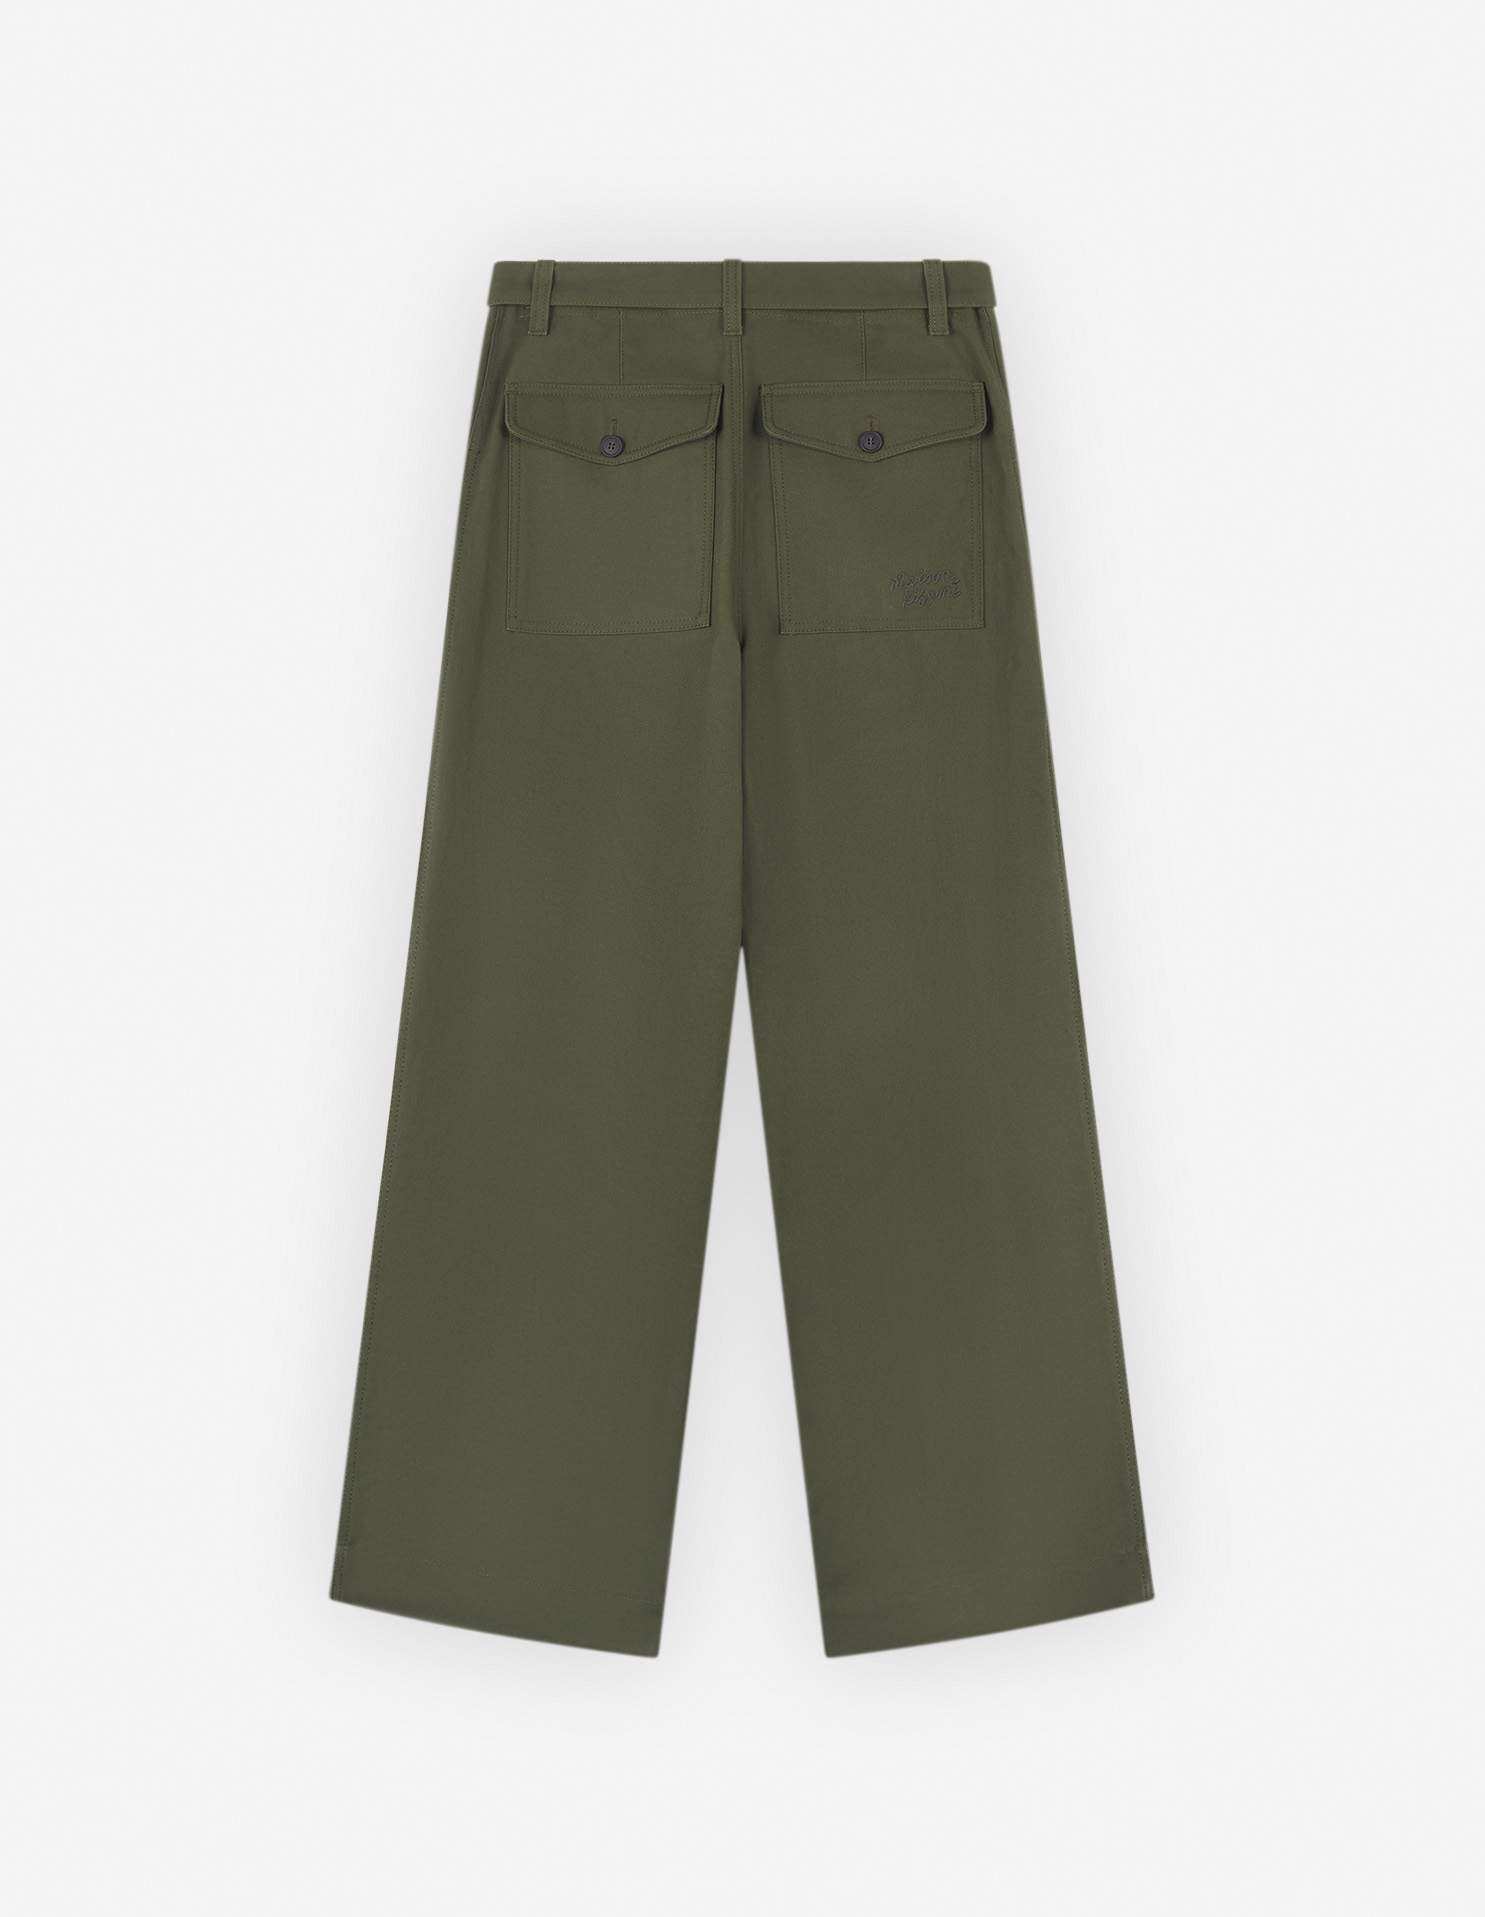 WORKWEAR PANTS IN COTTON TWILL WITH LOGO HANDWRITING